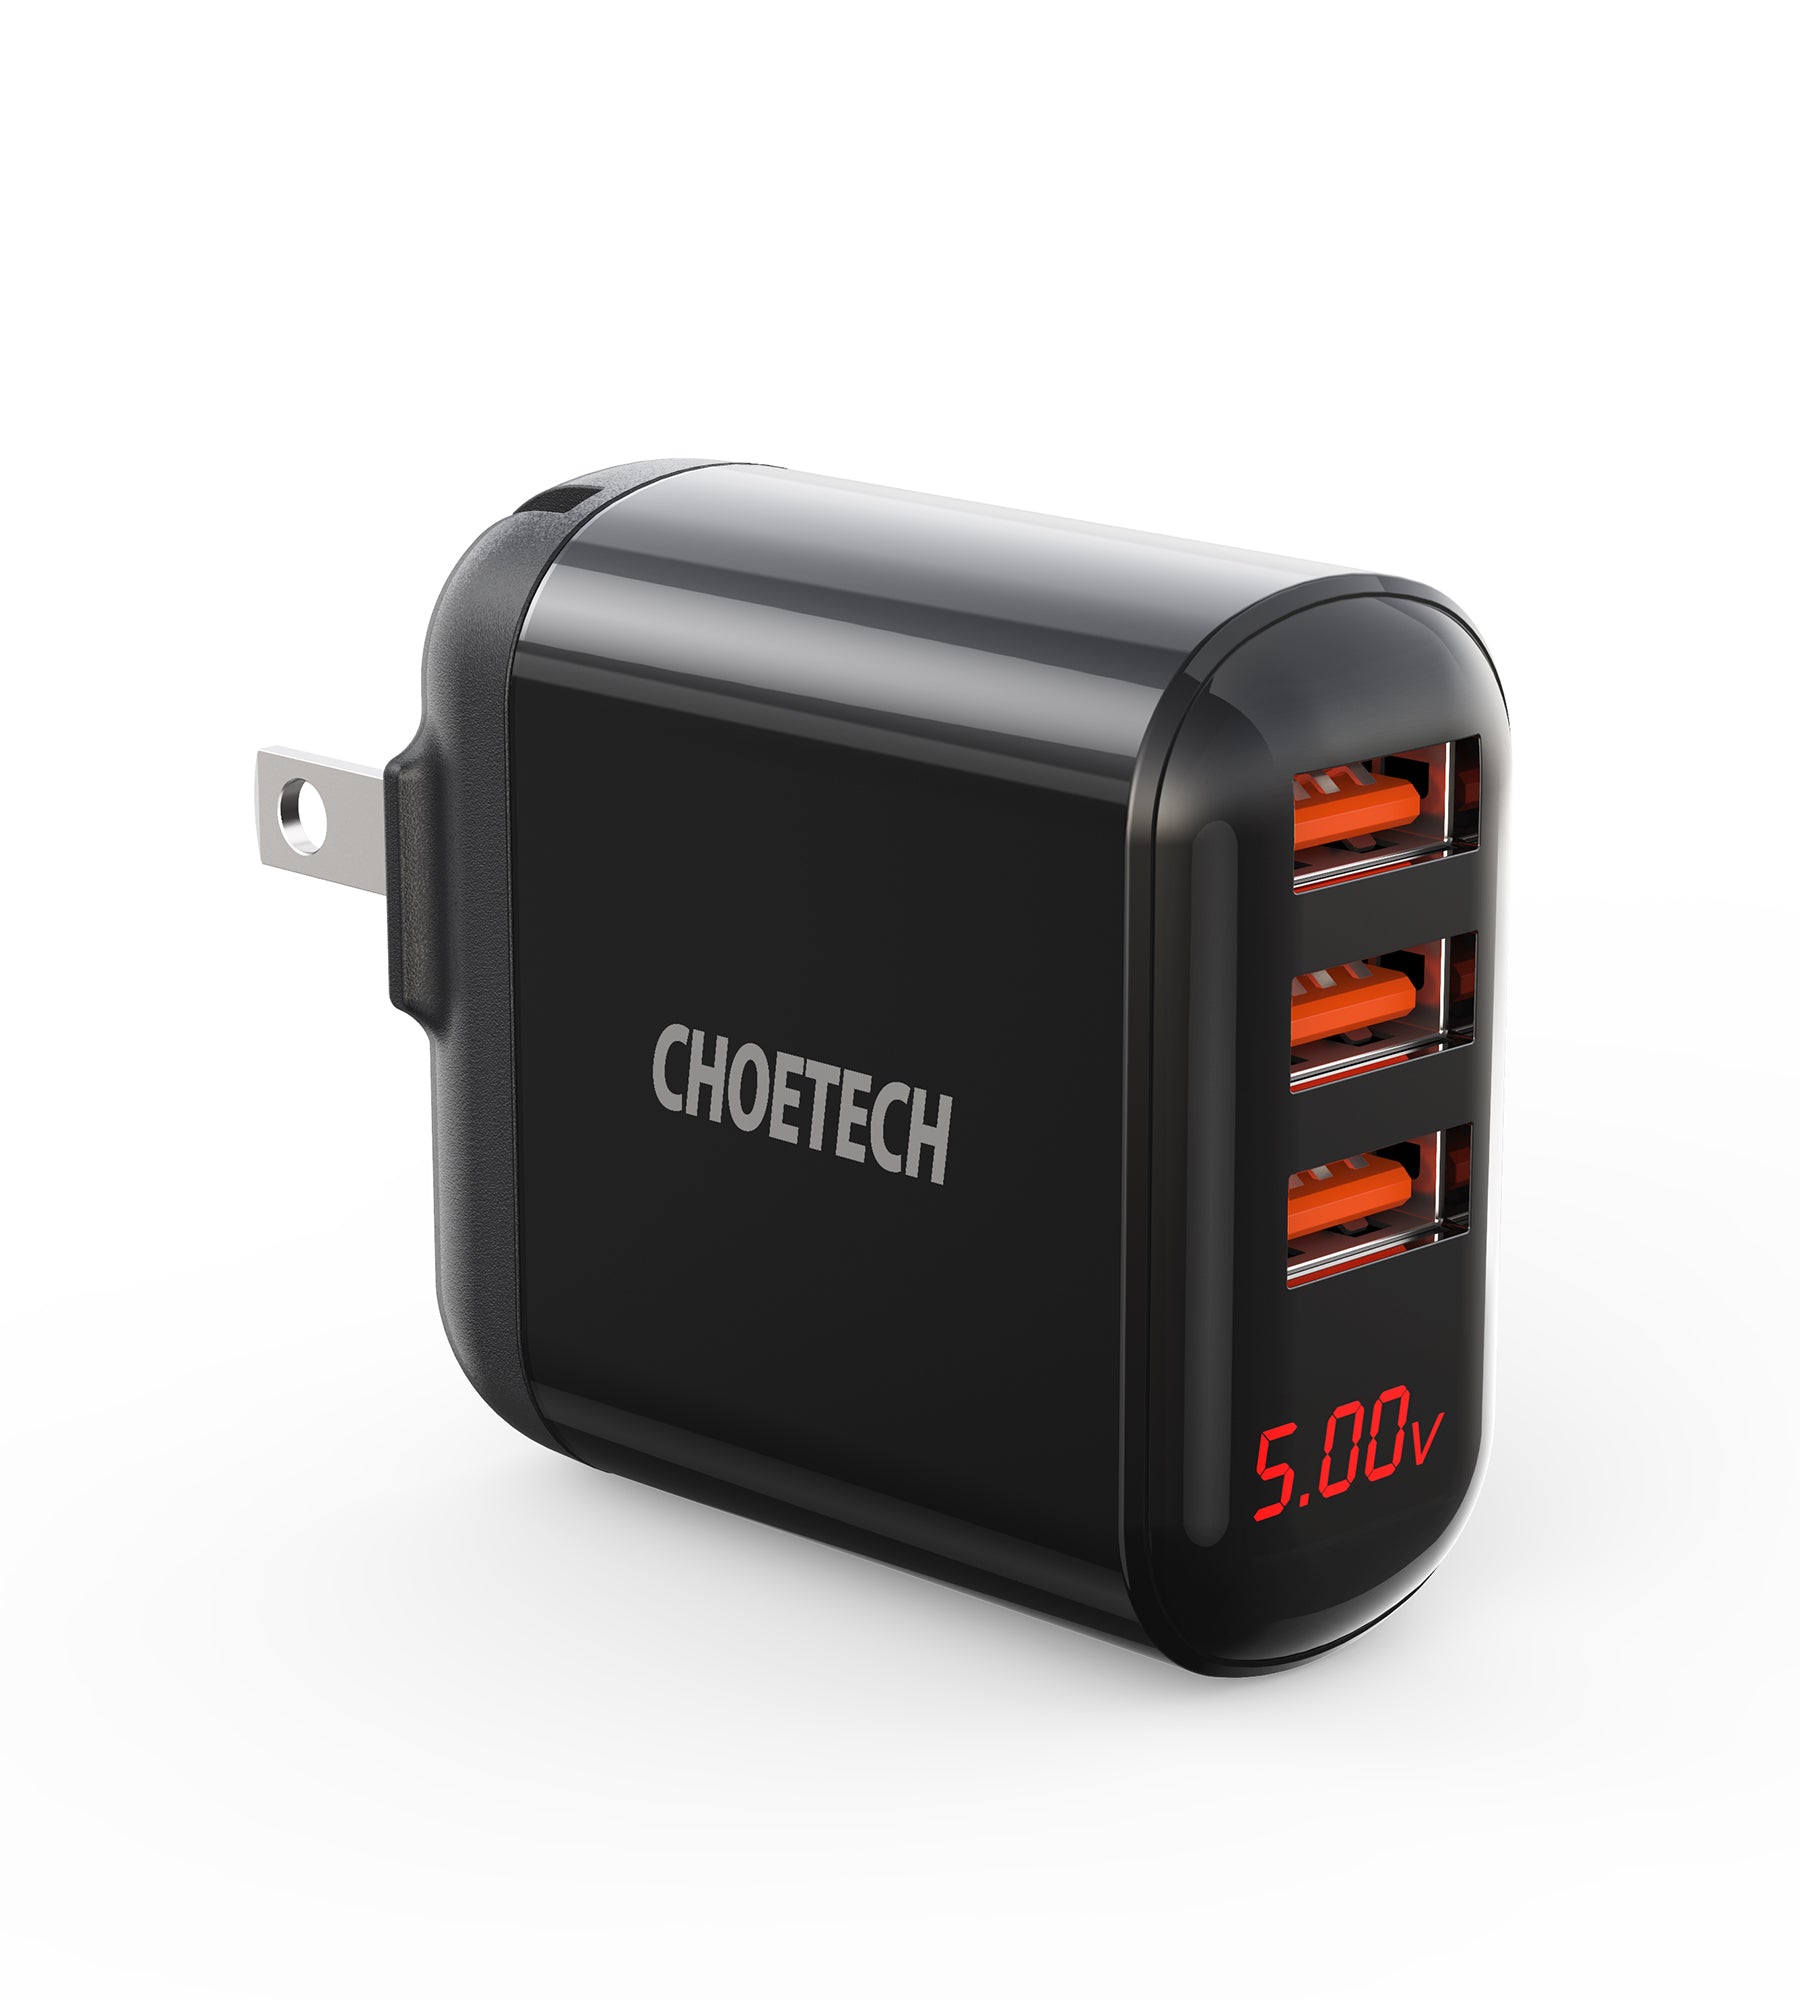 Q5009 CHOETECH USB Wall Charger, Triple-Port USB Plug with Foldable Plug and LED Digital Screen Display Compatible With iPhone SE 2020/11/XS/XS Max/XR/8 Plus/iPad Pro/Air 4/Mini 5/4 Ultra etc